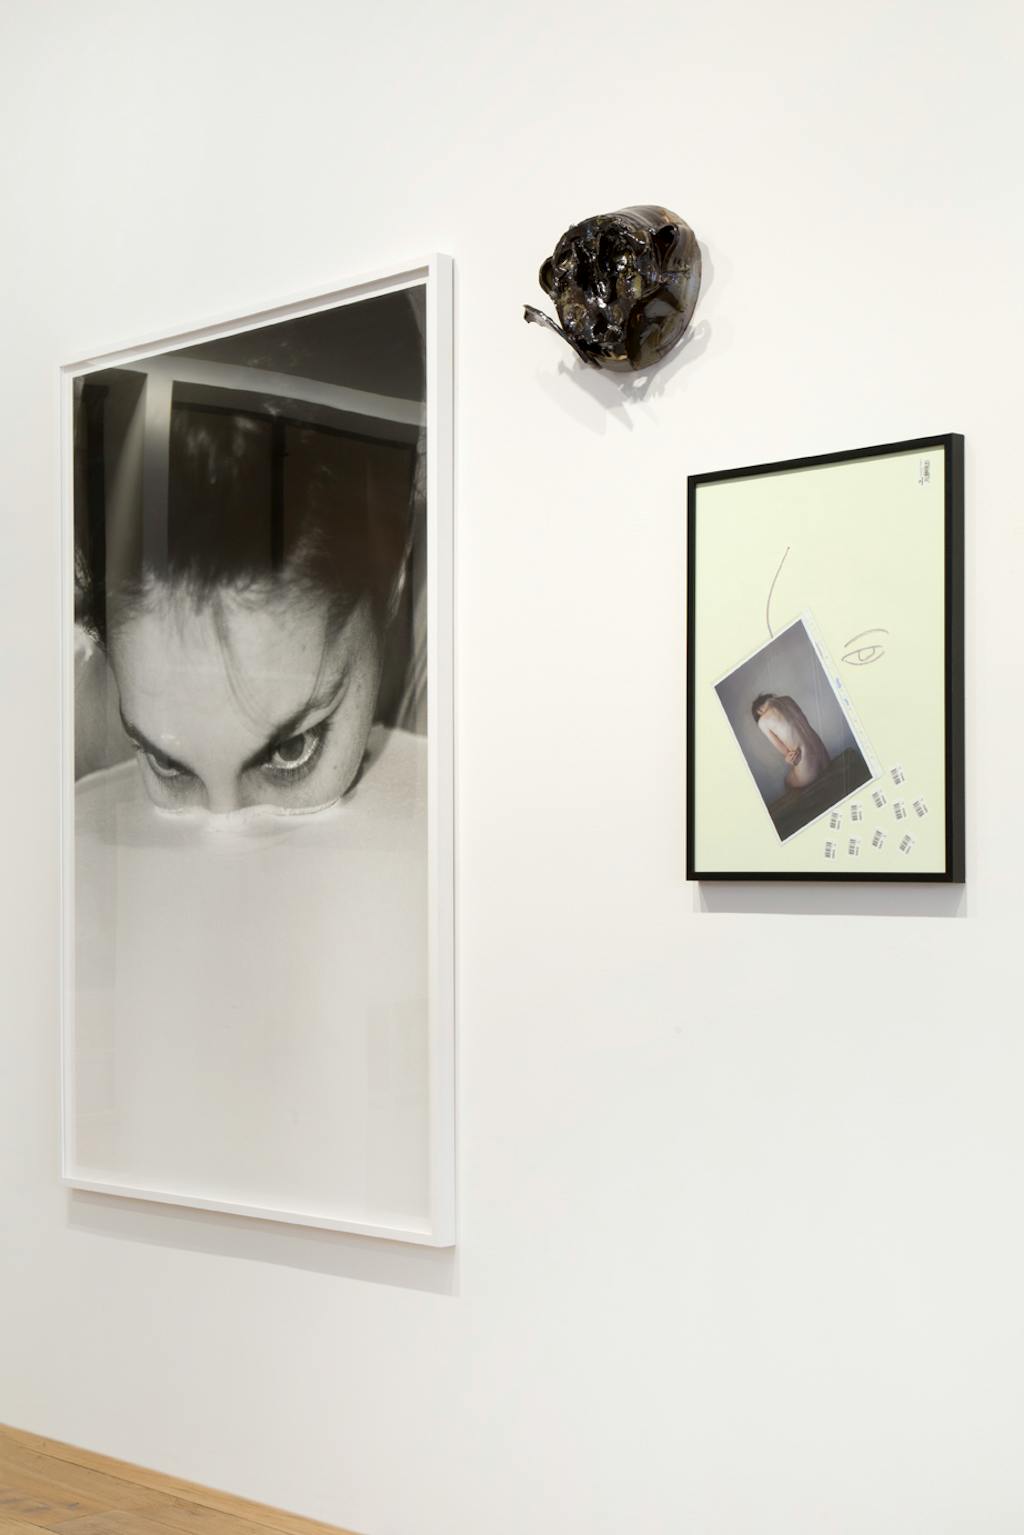 Michel François
Le monde et les bras, 1996
Black and white photograph
180 x 120 cm

Matthew Lutz‑Kinoy
Always surprised, 2018
Ceramic and glaze
35 x 30 x 13 cm

Camille Henrot
Untitled (Study for Monday), 2015
Pastel and collage on paper
64,8 x 49,5 cm

View of the group show “Mask”, kamel mennour (51 Brook Street), London, 2018

© ADAGP Michel François
© ADAGP Camille Henrot
© Matthew Lutz‑Kinoy
Photo. archives kamel mennour
Courtesy the artist and kamel mennour, Paris/London - © kamel mennour